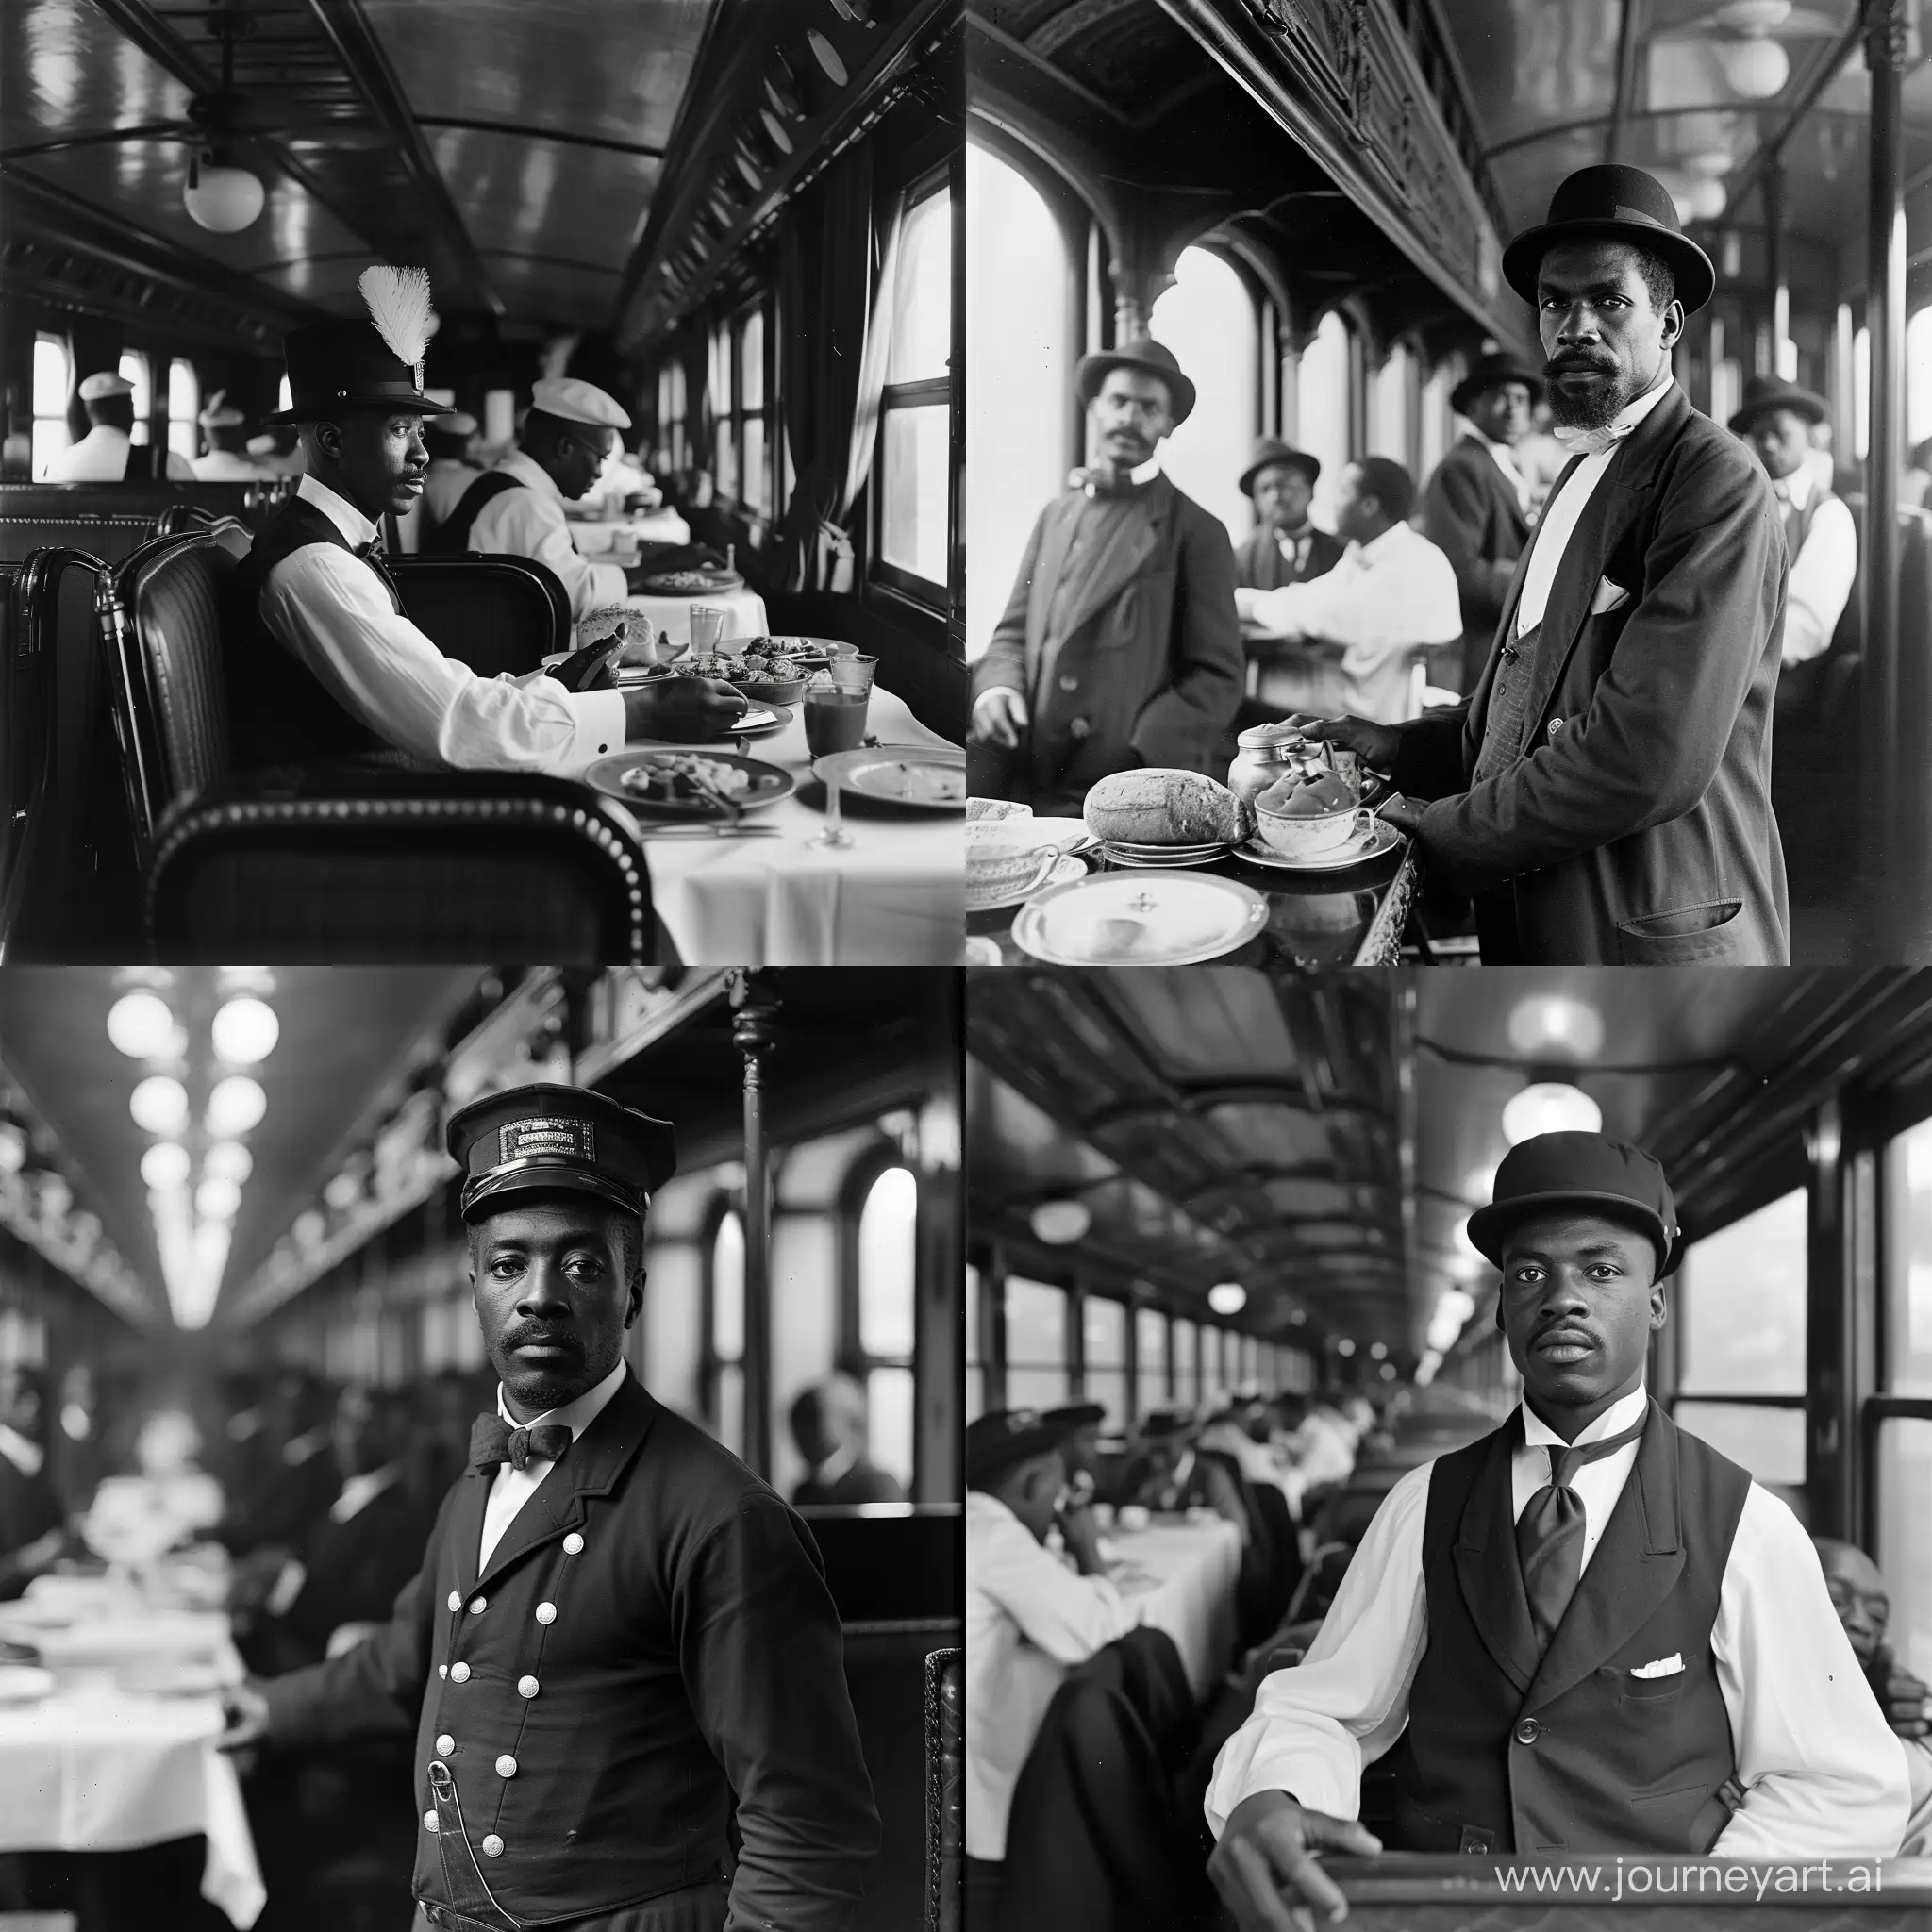 Pullman porters, who were almost exclusively Black men, worked the sleeping and dining cars that gave white travelers an extravagant riding experience